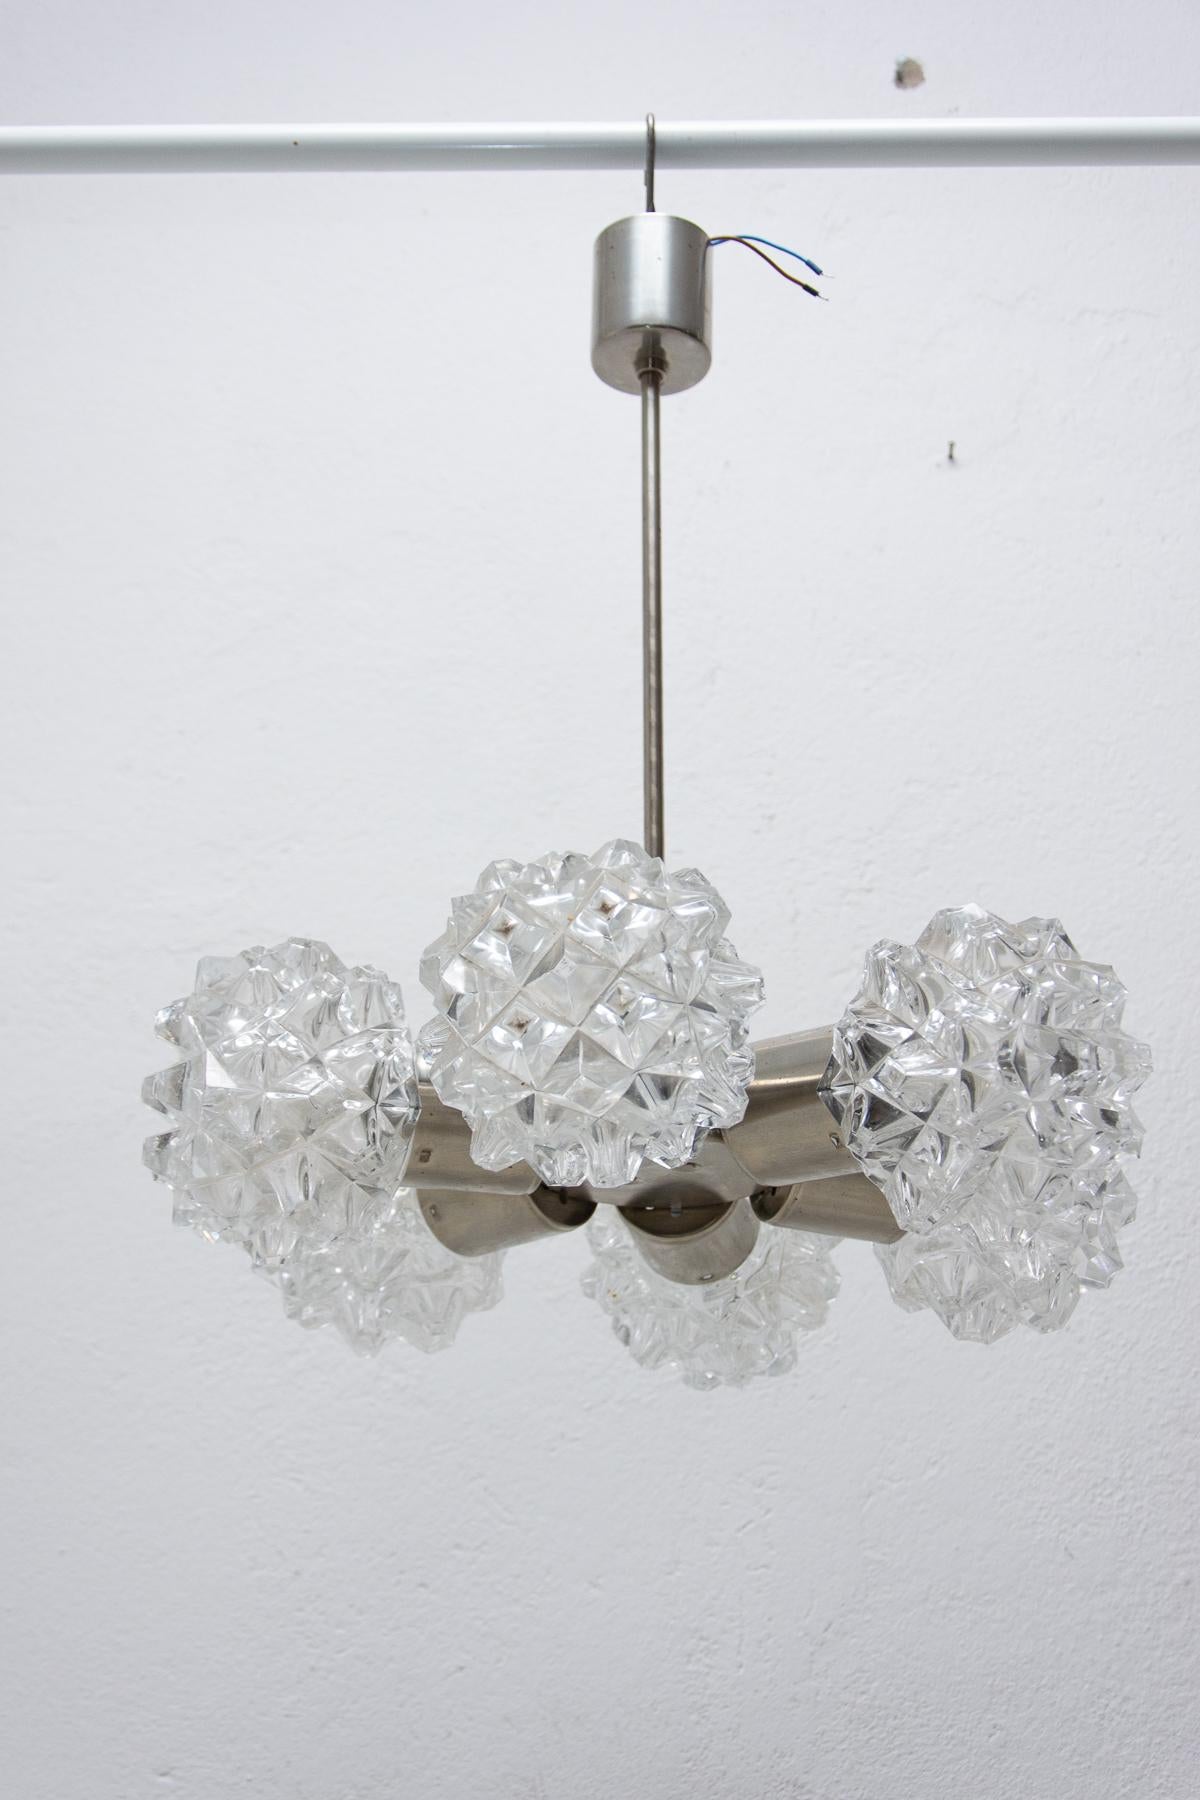 Czechoslovak cut glass and chrome plated ceiling light, made in the former Czechoslovakia for Kamenický Šenov in the 1970´s. It features chrome steel structure and six cut glass lampshades. The pendant is in very good condition. Newly wired.

E27